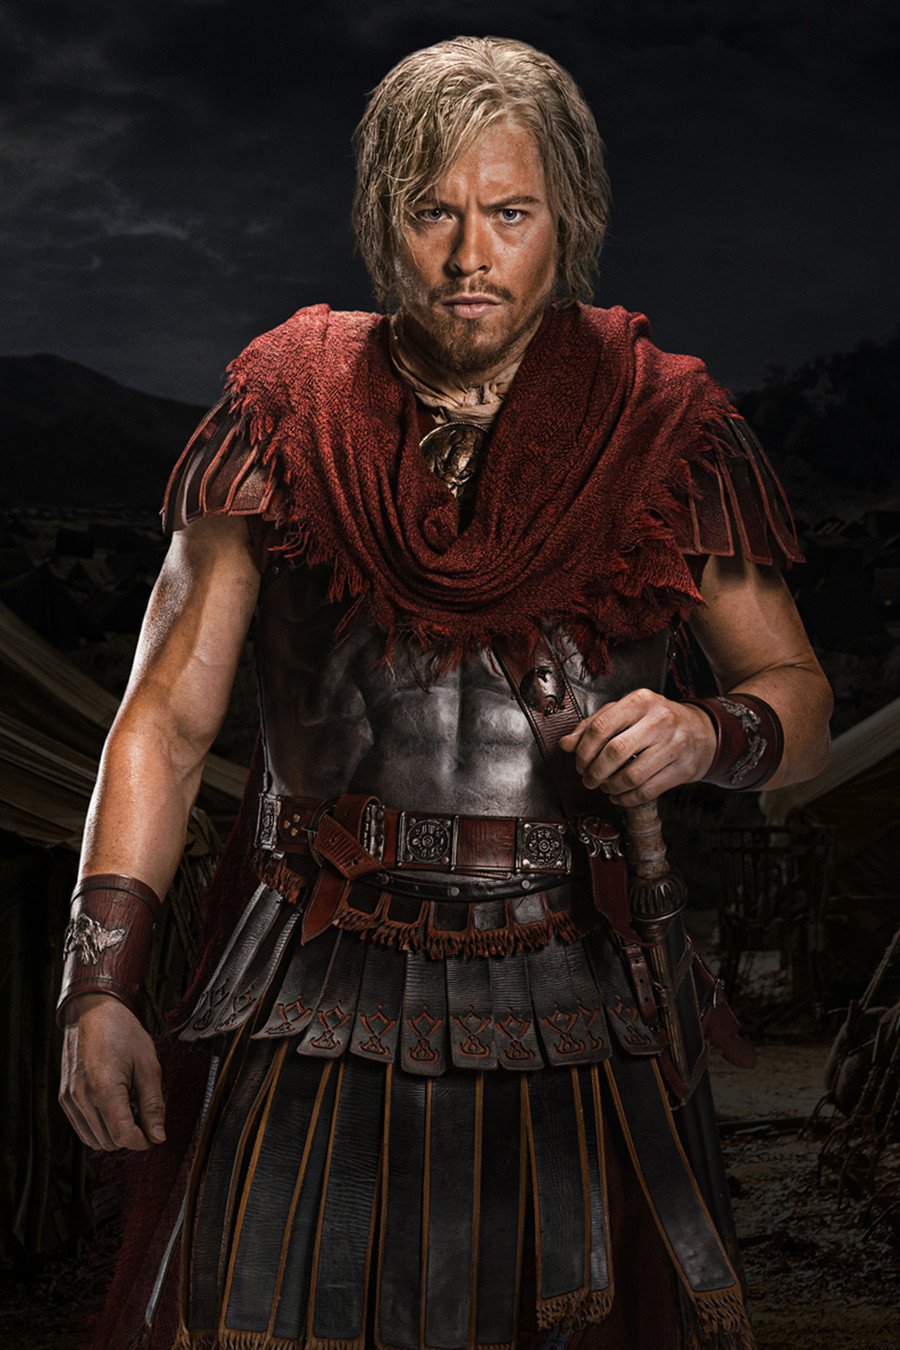 http://images1.wikia.nocookie.net/__cb20121204143552/spartacus/images/7/7d/Redeye-spartacus-war-of-the-damned-photo-galle-011.jpg